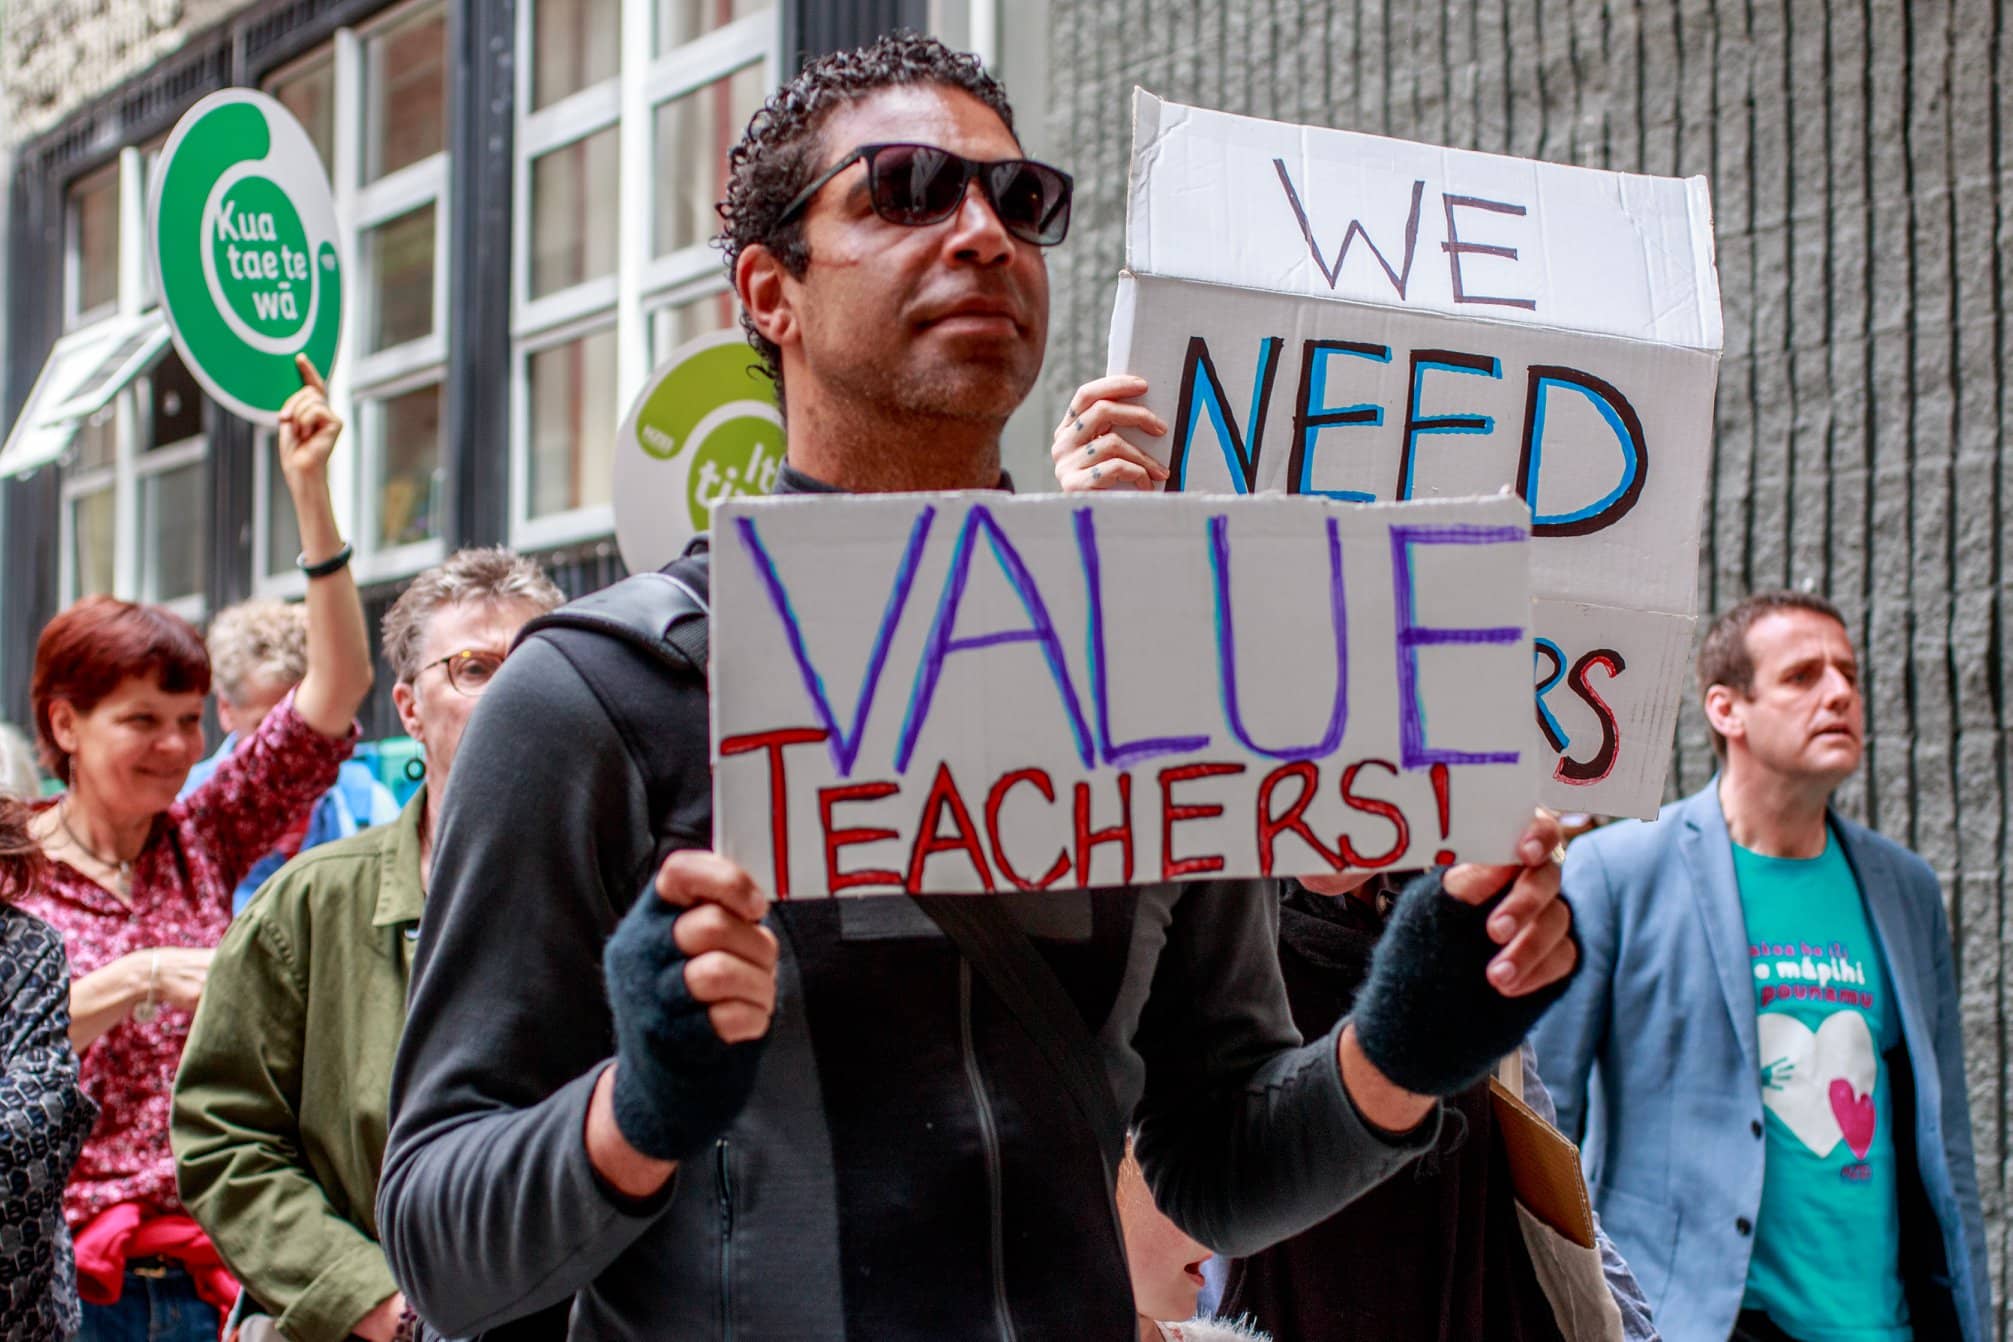 People march down the streets of Wellington, and we see the close up of several dedicated volunteers or teachers raising signs, “Value teachers”, and “We need teachers”